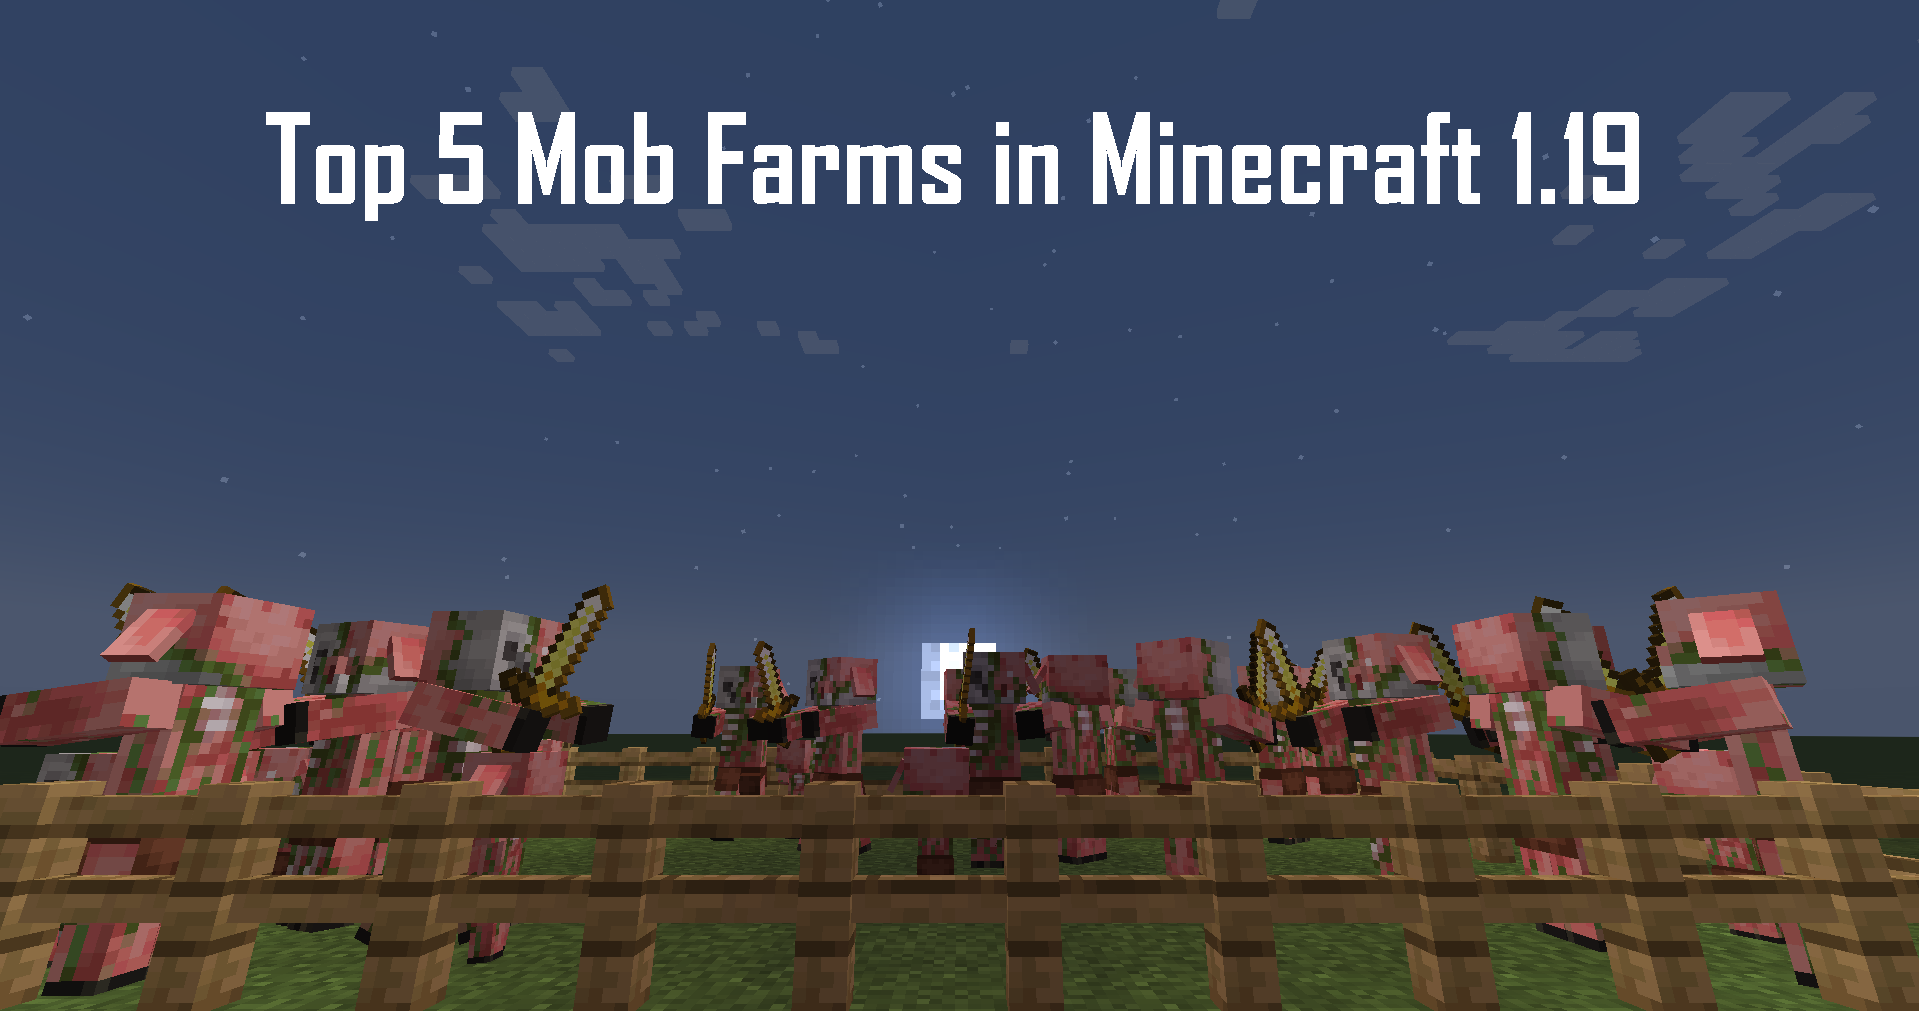 Top 5 Mob Farms in Minecraft 1.19